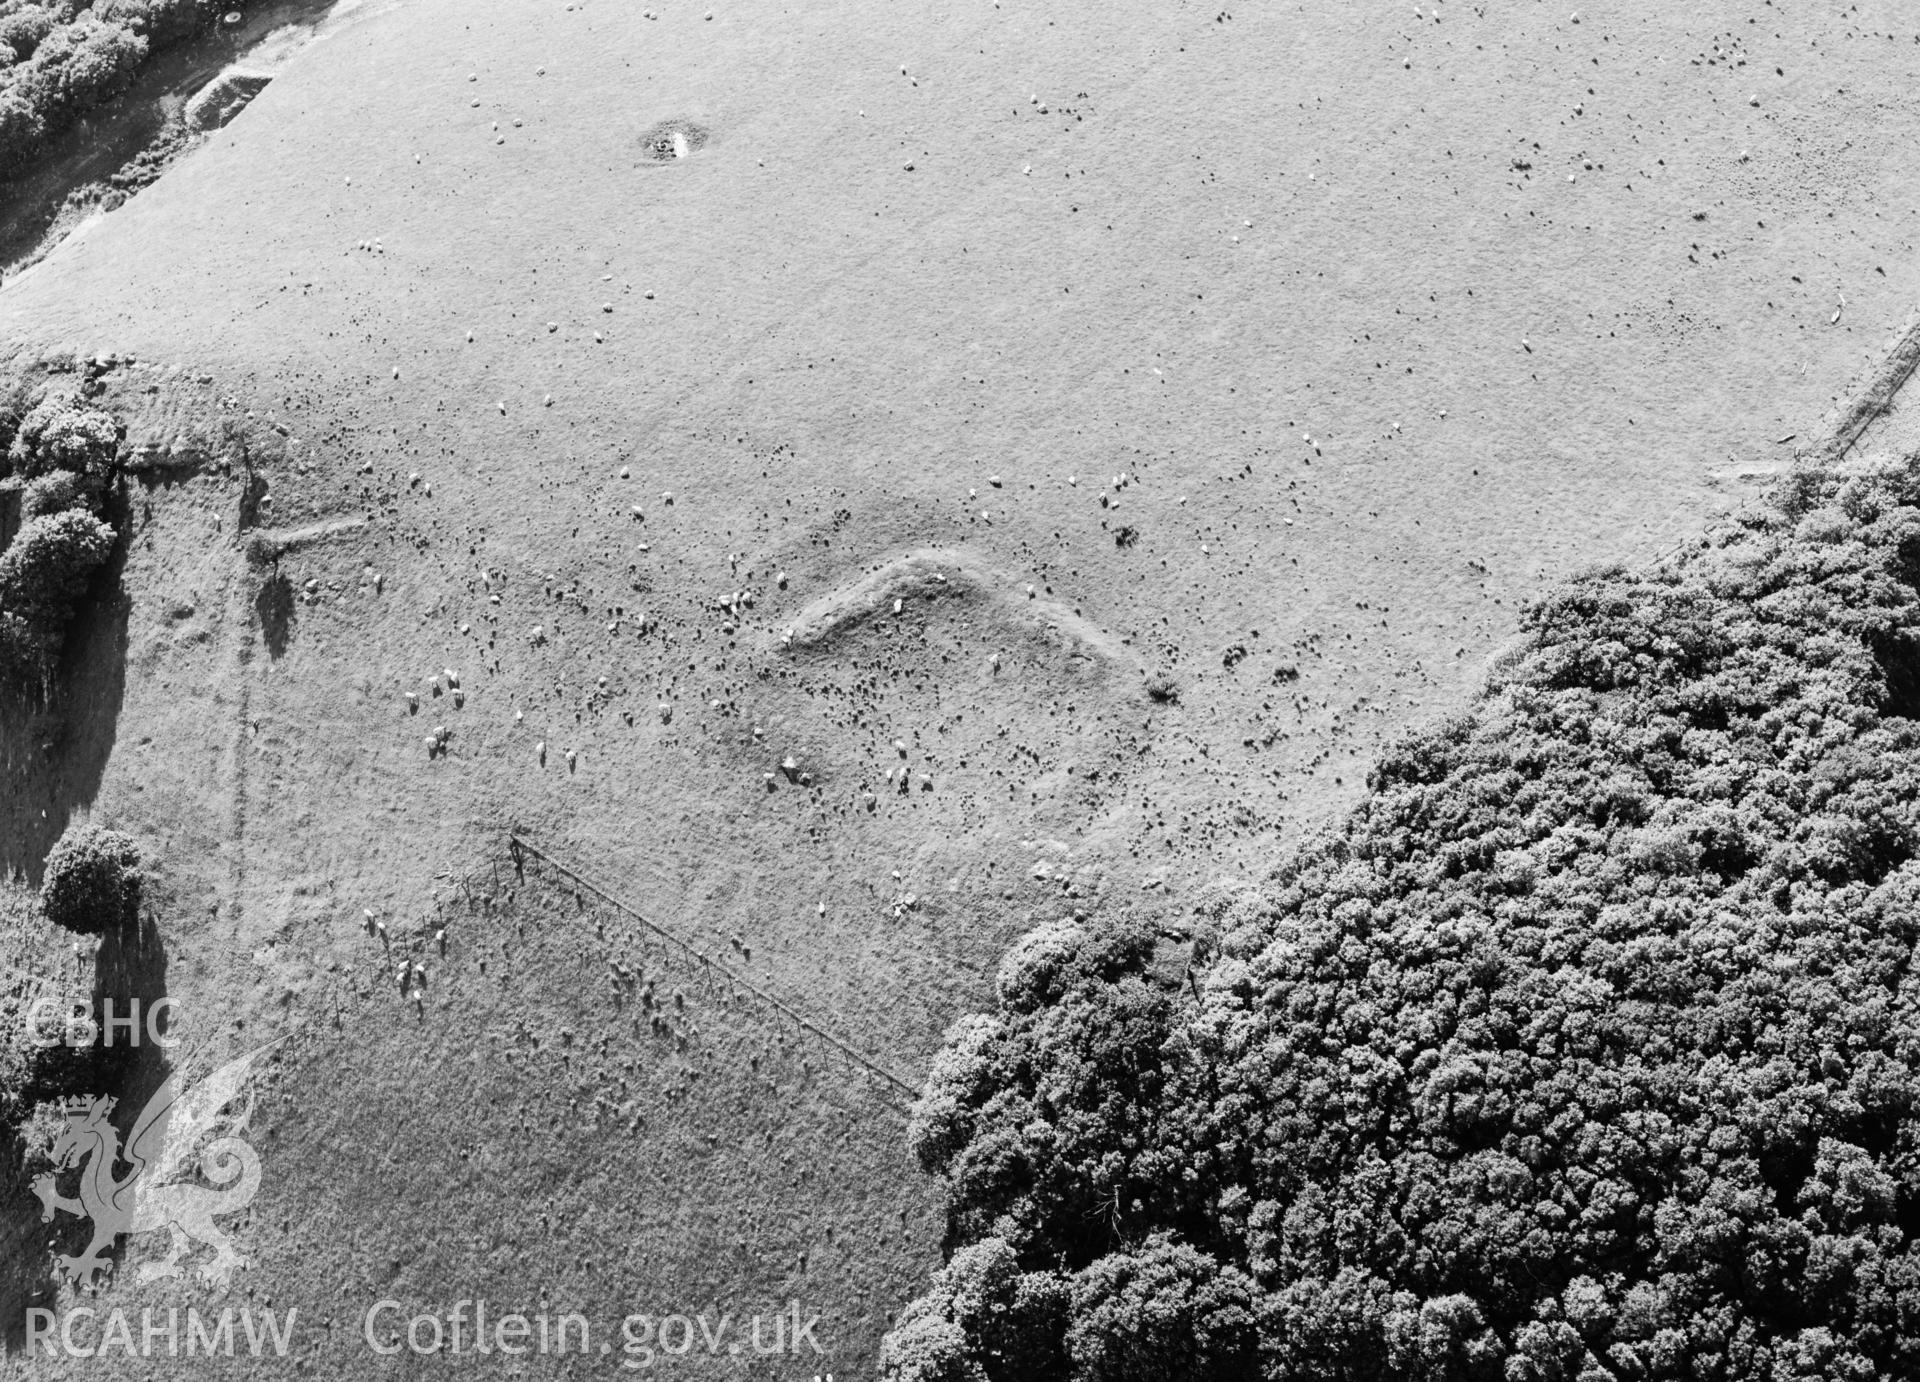 RCAHMW Black and white oblique aerial photograph of Coed Ty-mawr Enclosure, Llanafanfawr, taken on 19/06/1998 by Toby Driver